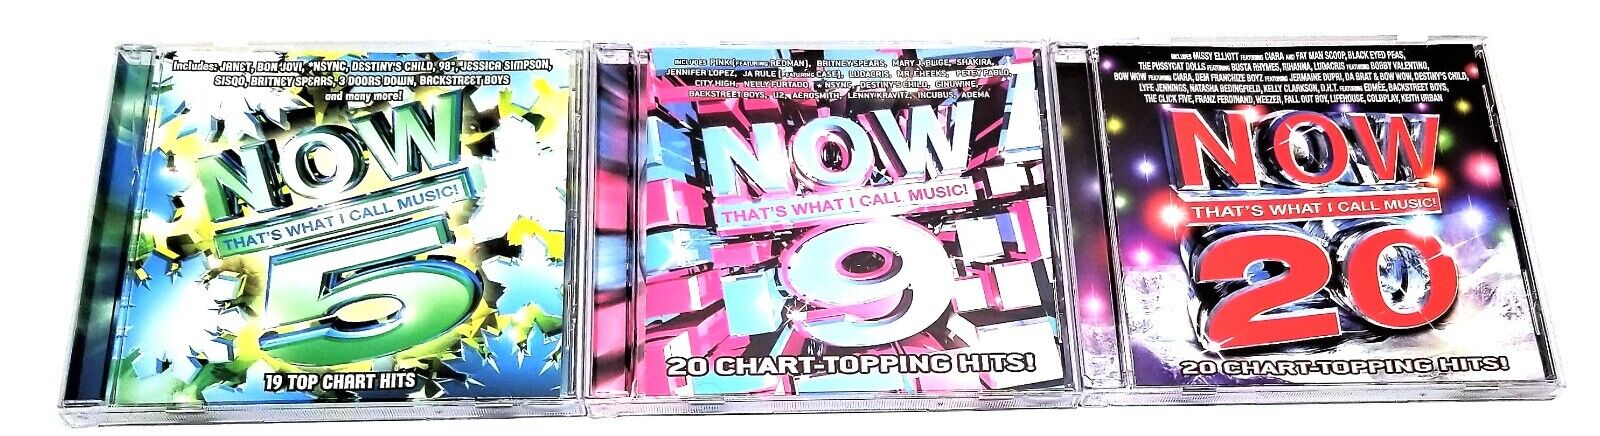 Now That\'s What I Call Music 5, 9 & 20 CD Bundle